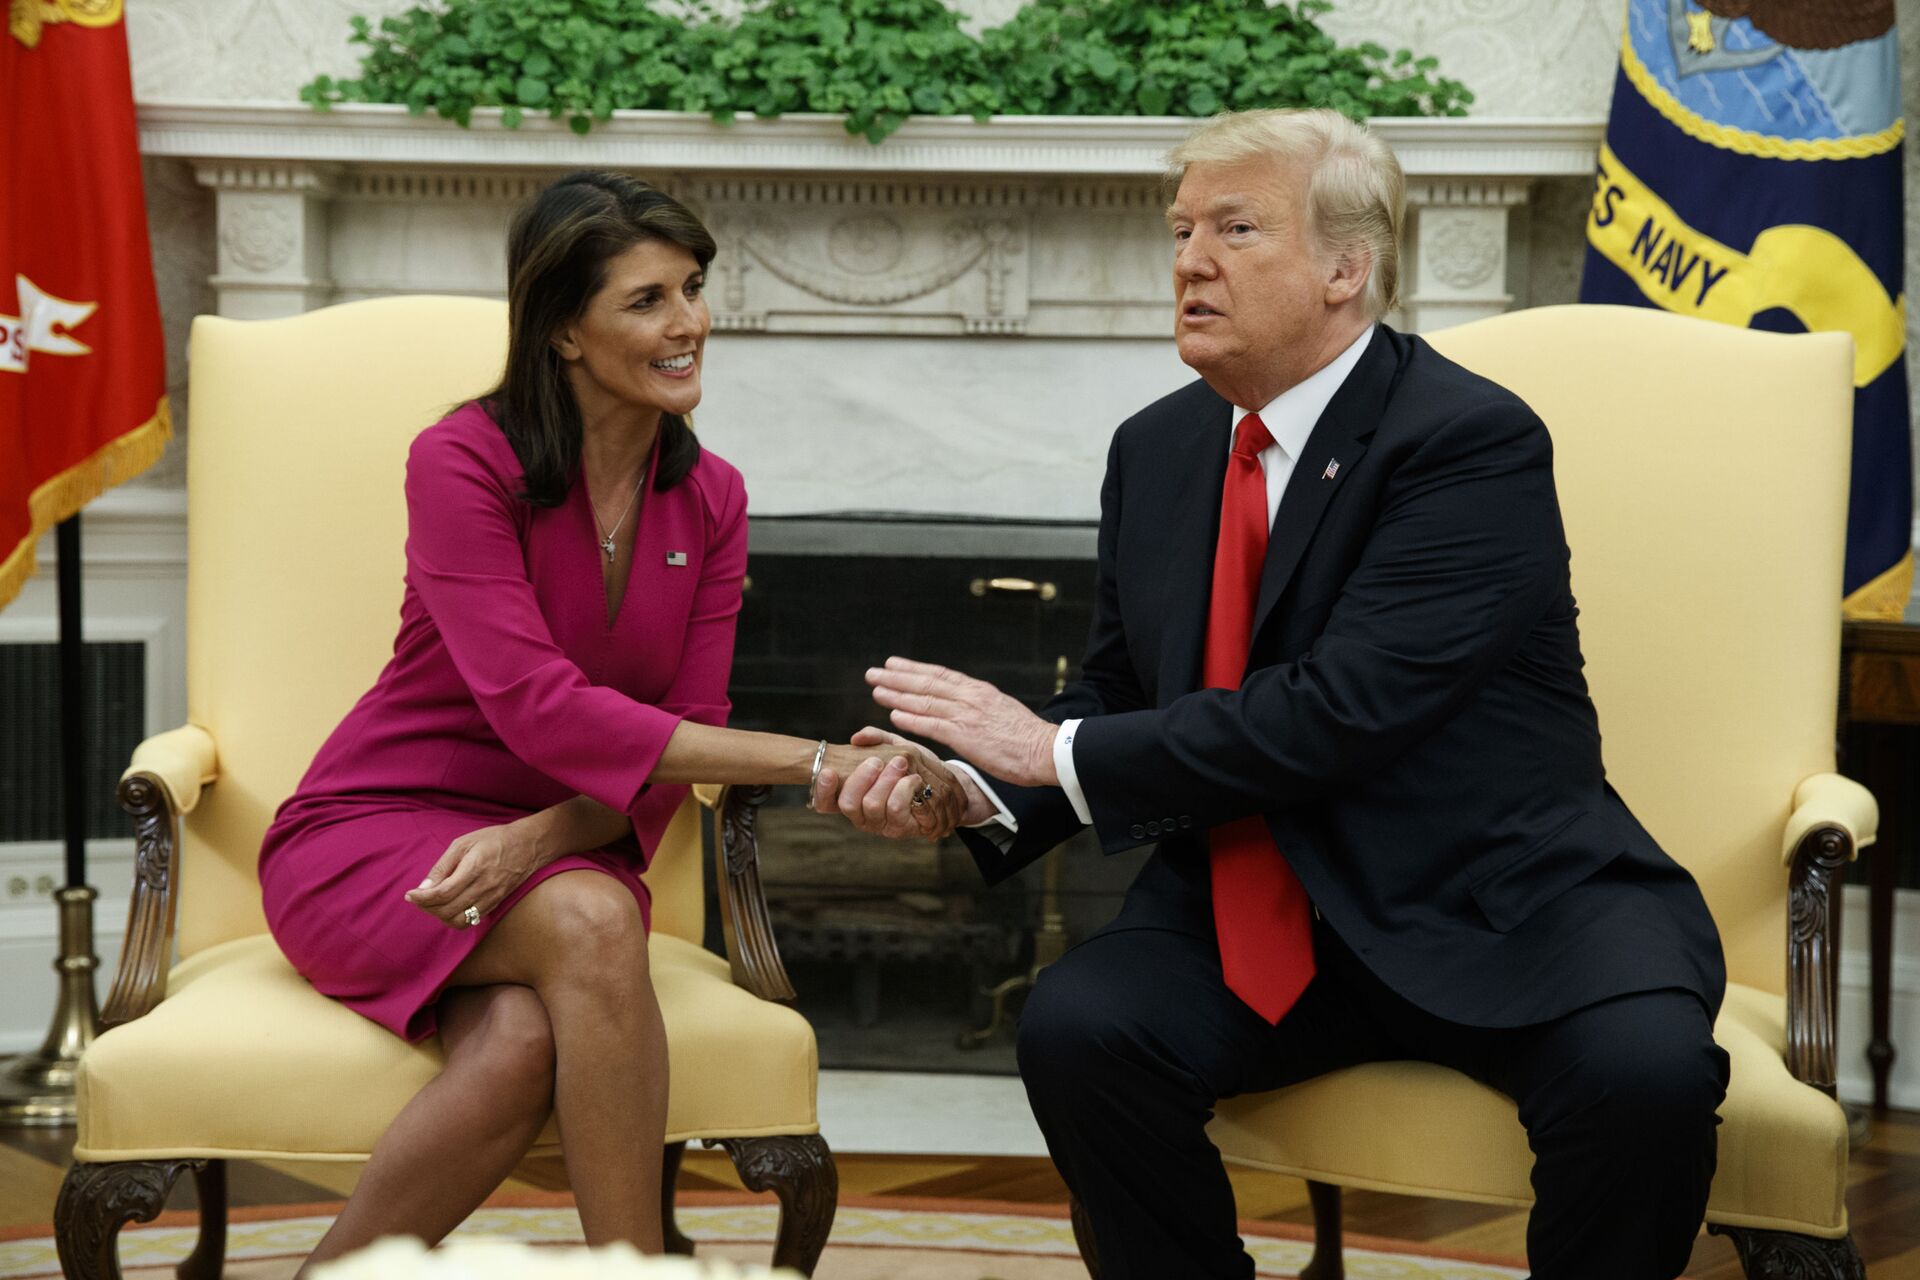 President Donald Trump meets with outgoing U.S. Ambassador to the United Nations Nikki Haley in the Oval Office of the White House, Tuesday, Oct. 9, 2018, in Washington - Sputnik International, 1920, 07.09.2021